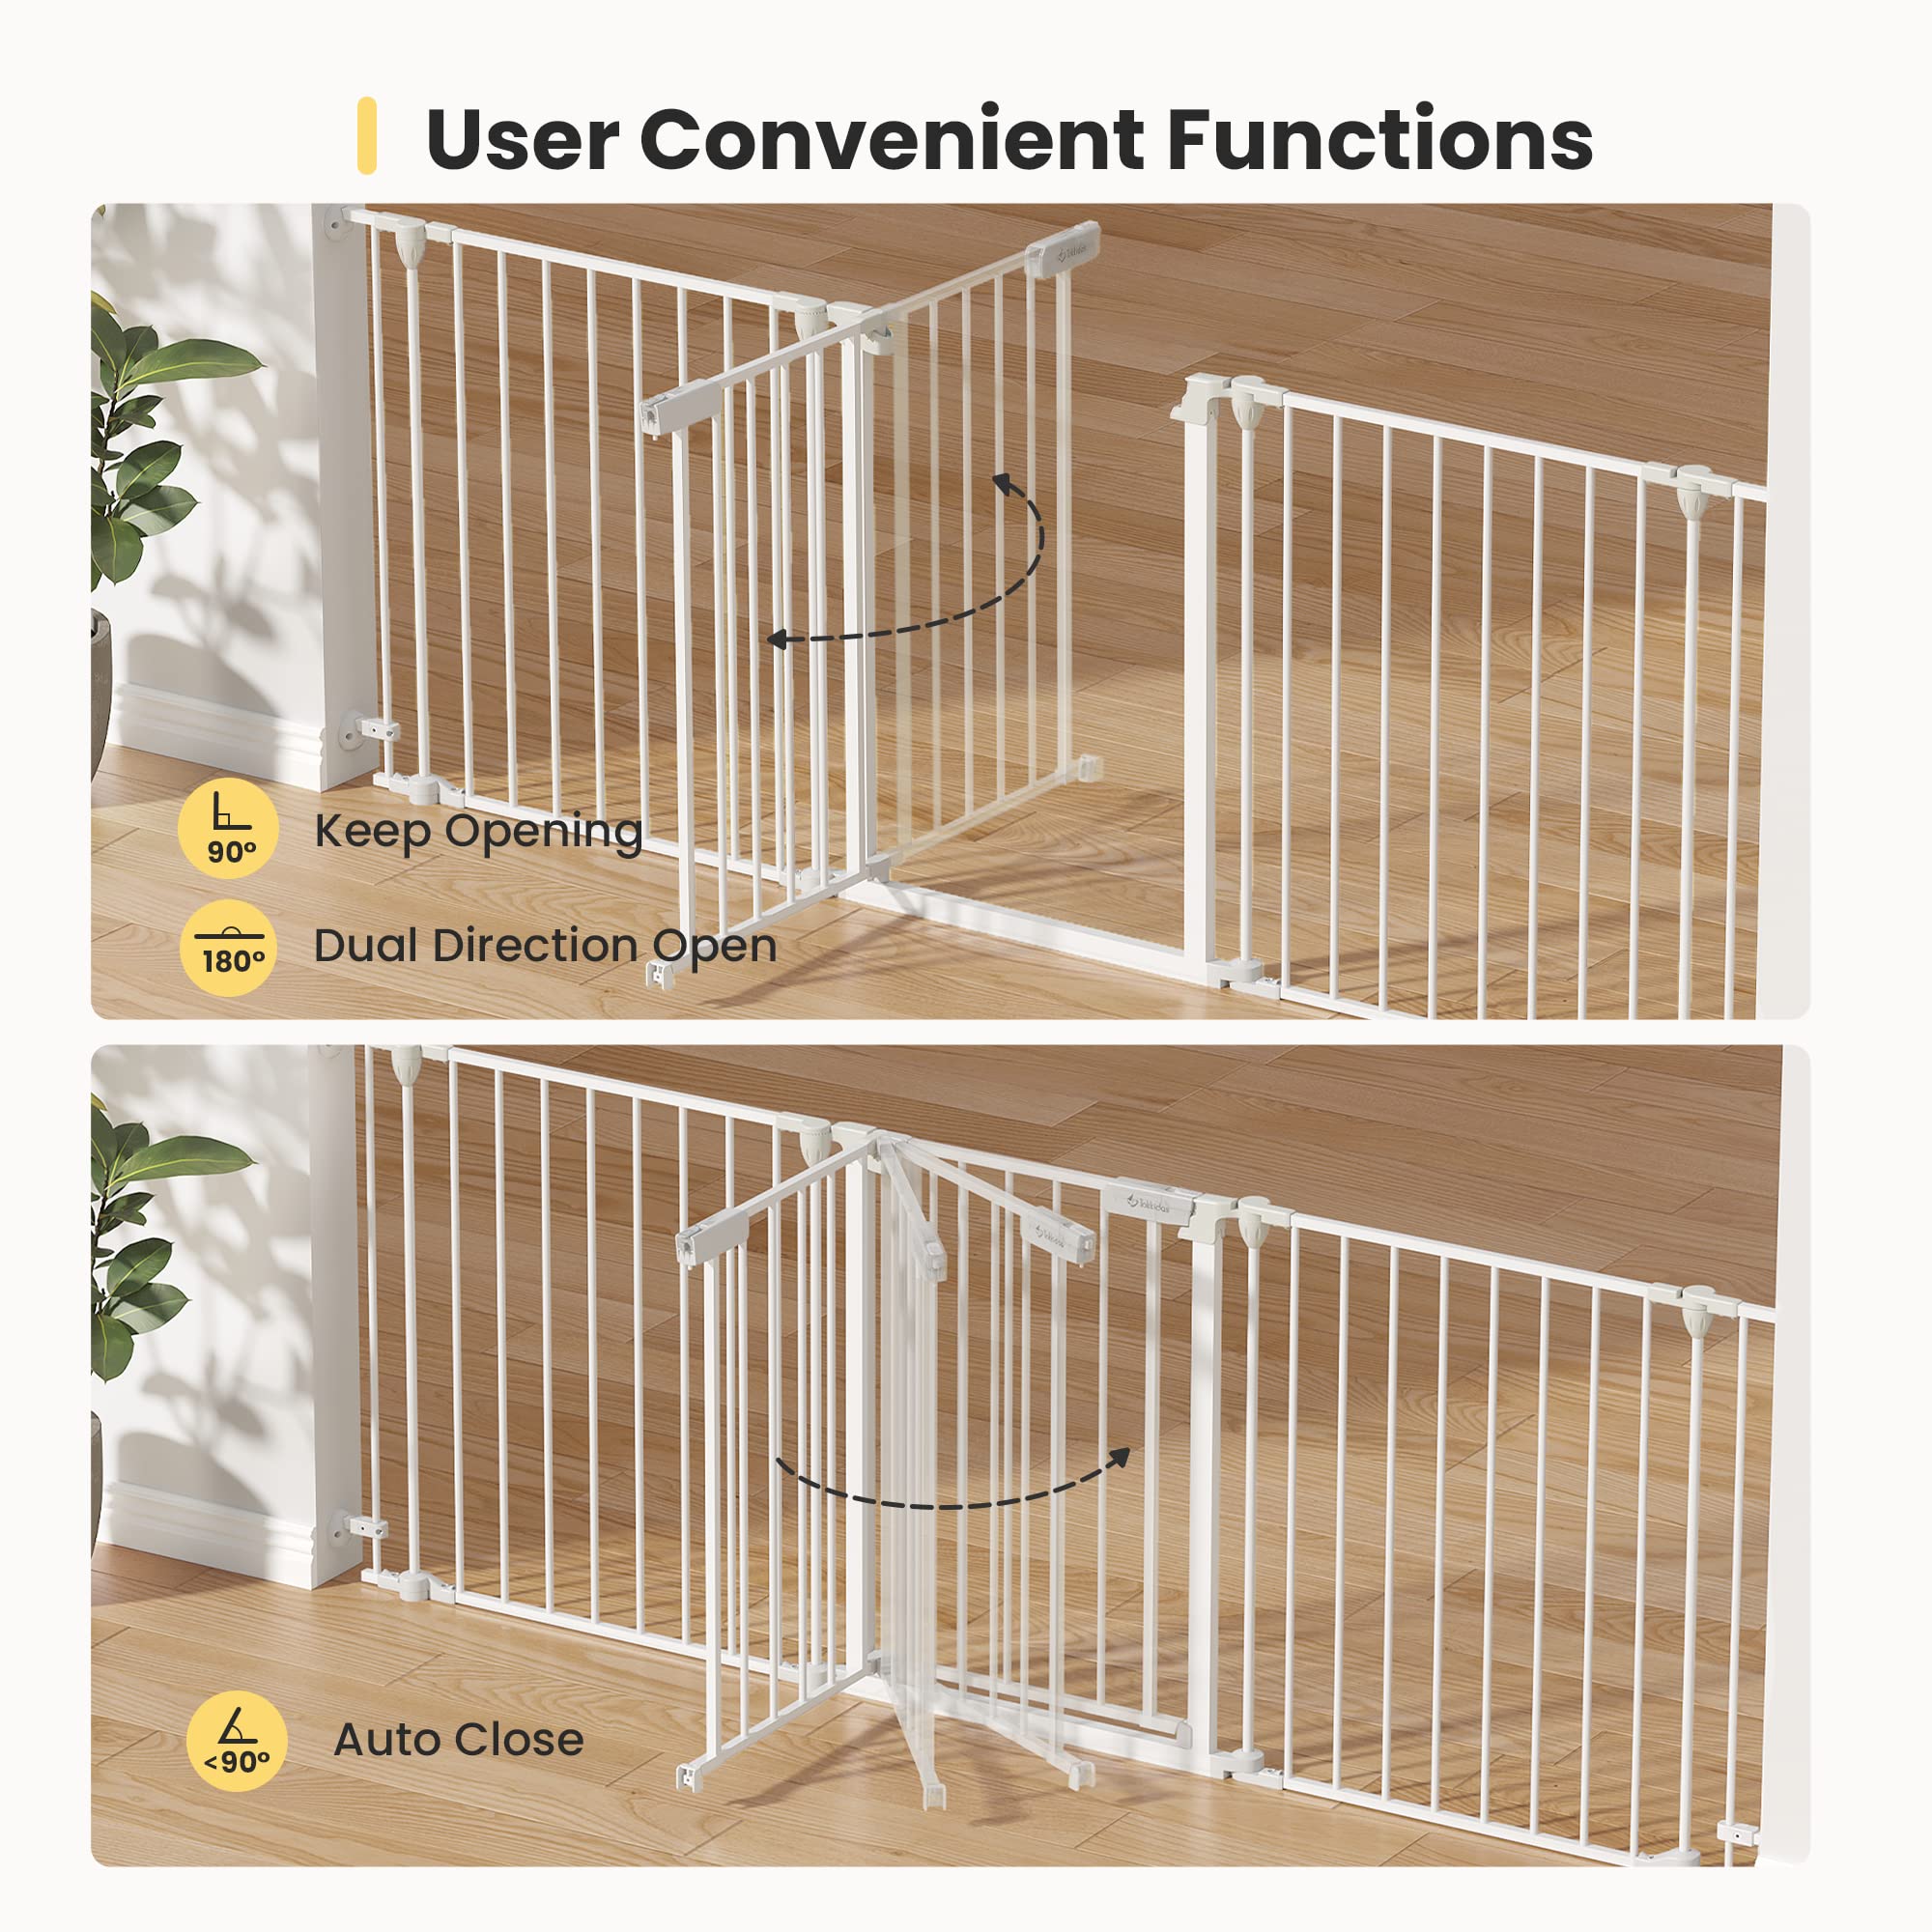 Tokkidas 24.4”-80” Auto Close Baby Gate, Extra Wide Dog Gate with One Hand Operation, Hardware Mount, Foldable 3 Steel Panels Angle, Deluxe Walk Thru Pet Gate for Stairs, Doorways, Kitchen, 29” Height